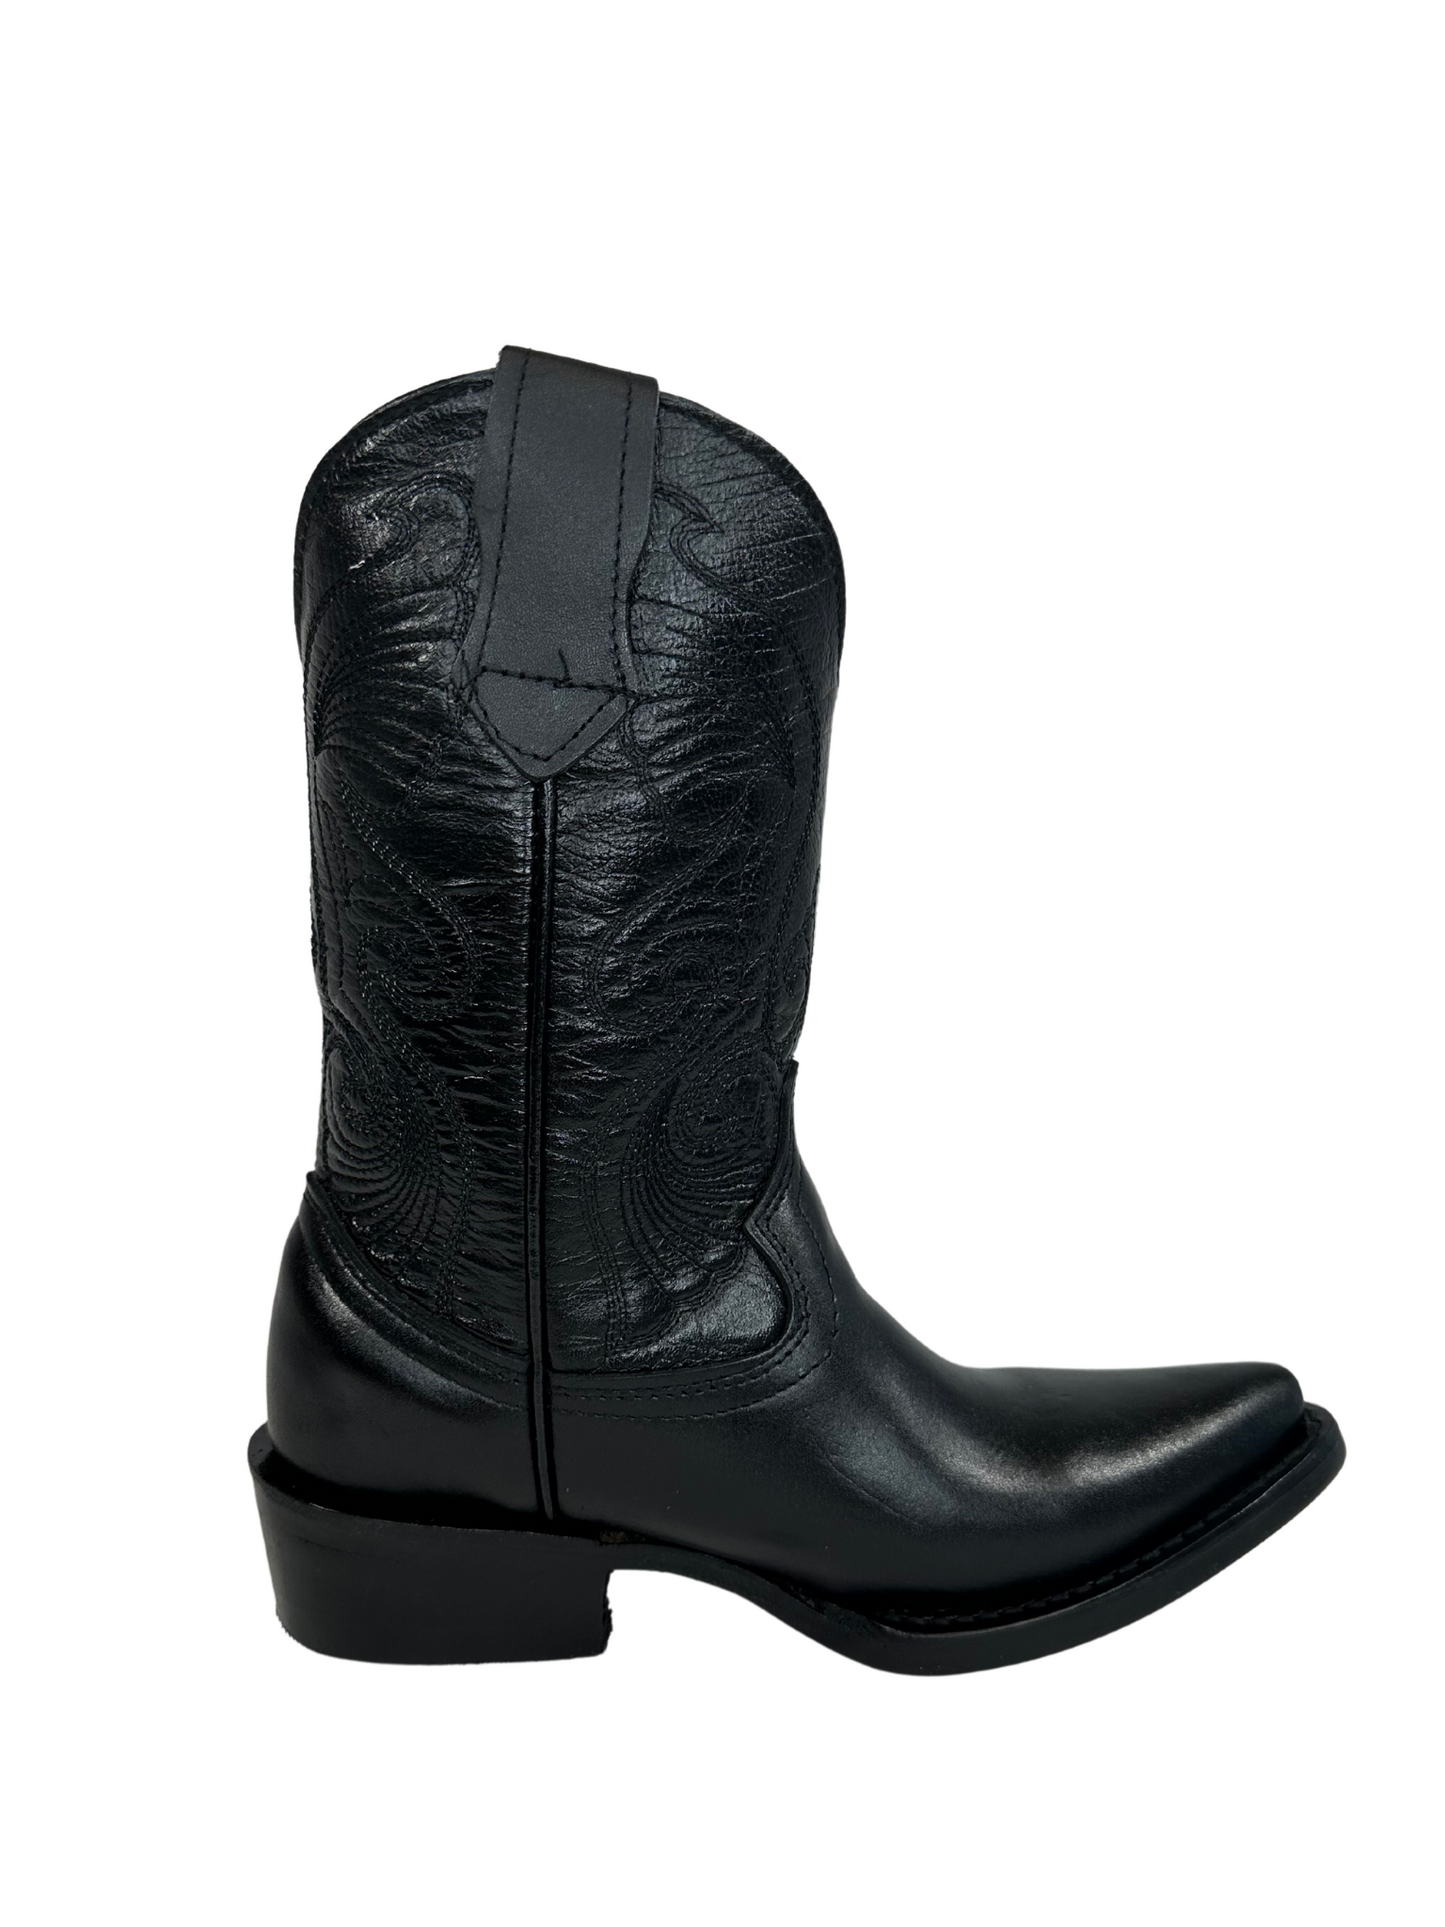 Botas Don Pedro Youth Black Leather Boot